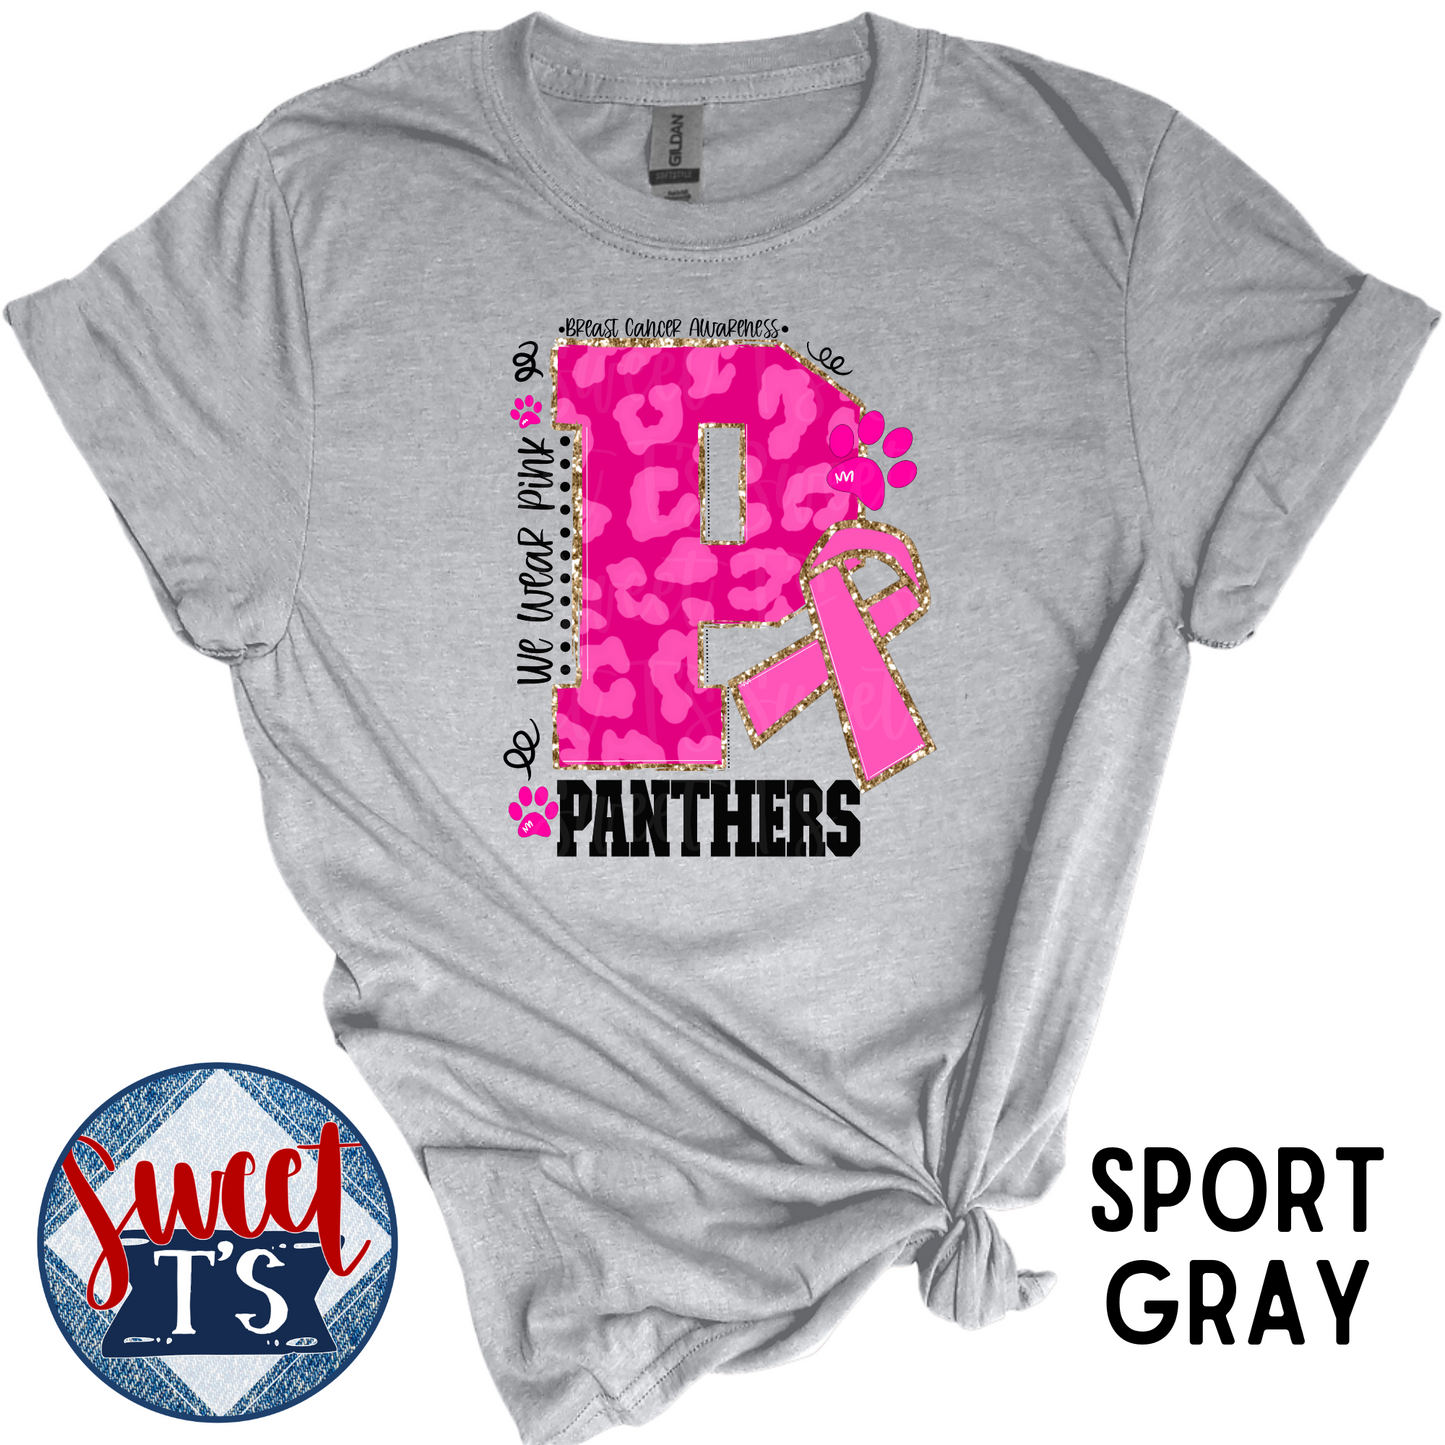 Breast Cancer Awareness *Panthers*